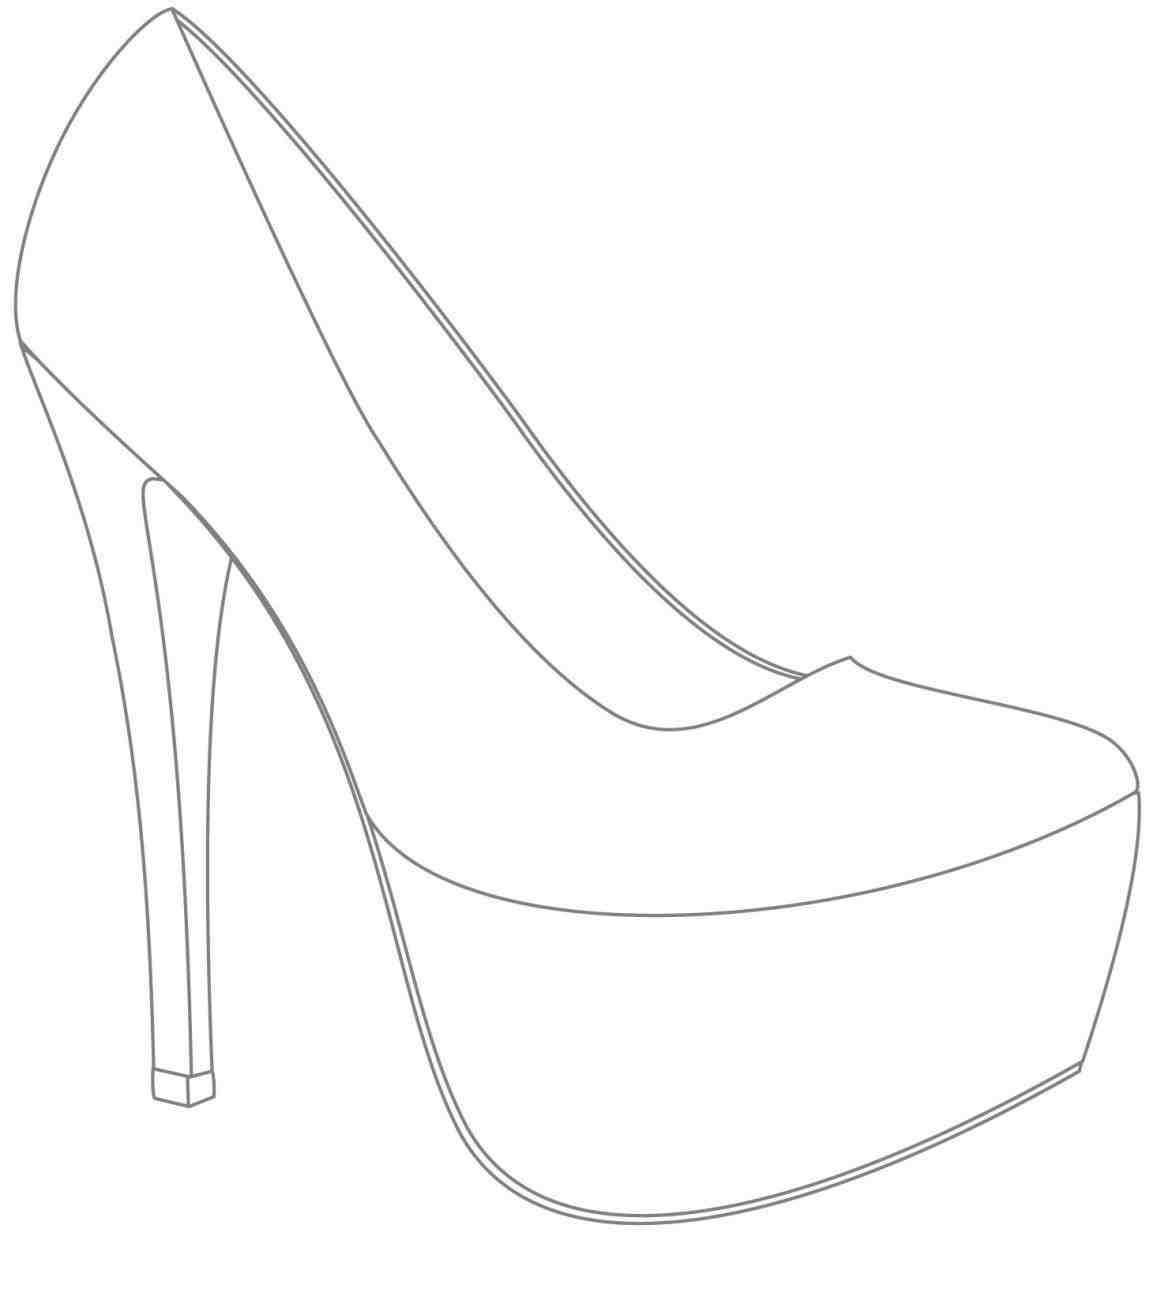 High Heel Drawing Template At Paintingvalley | Explore Regarding High Heel Shoe Template For Card